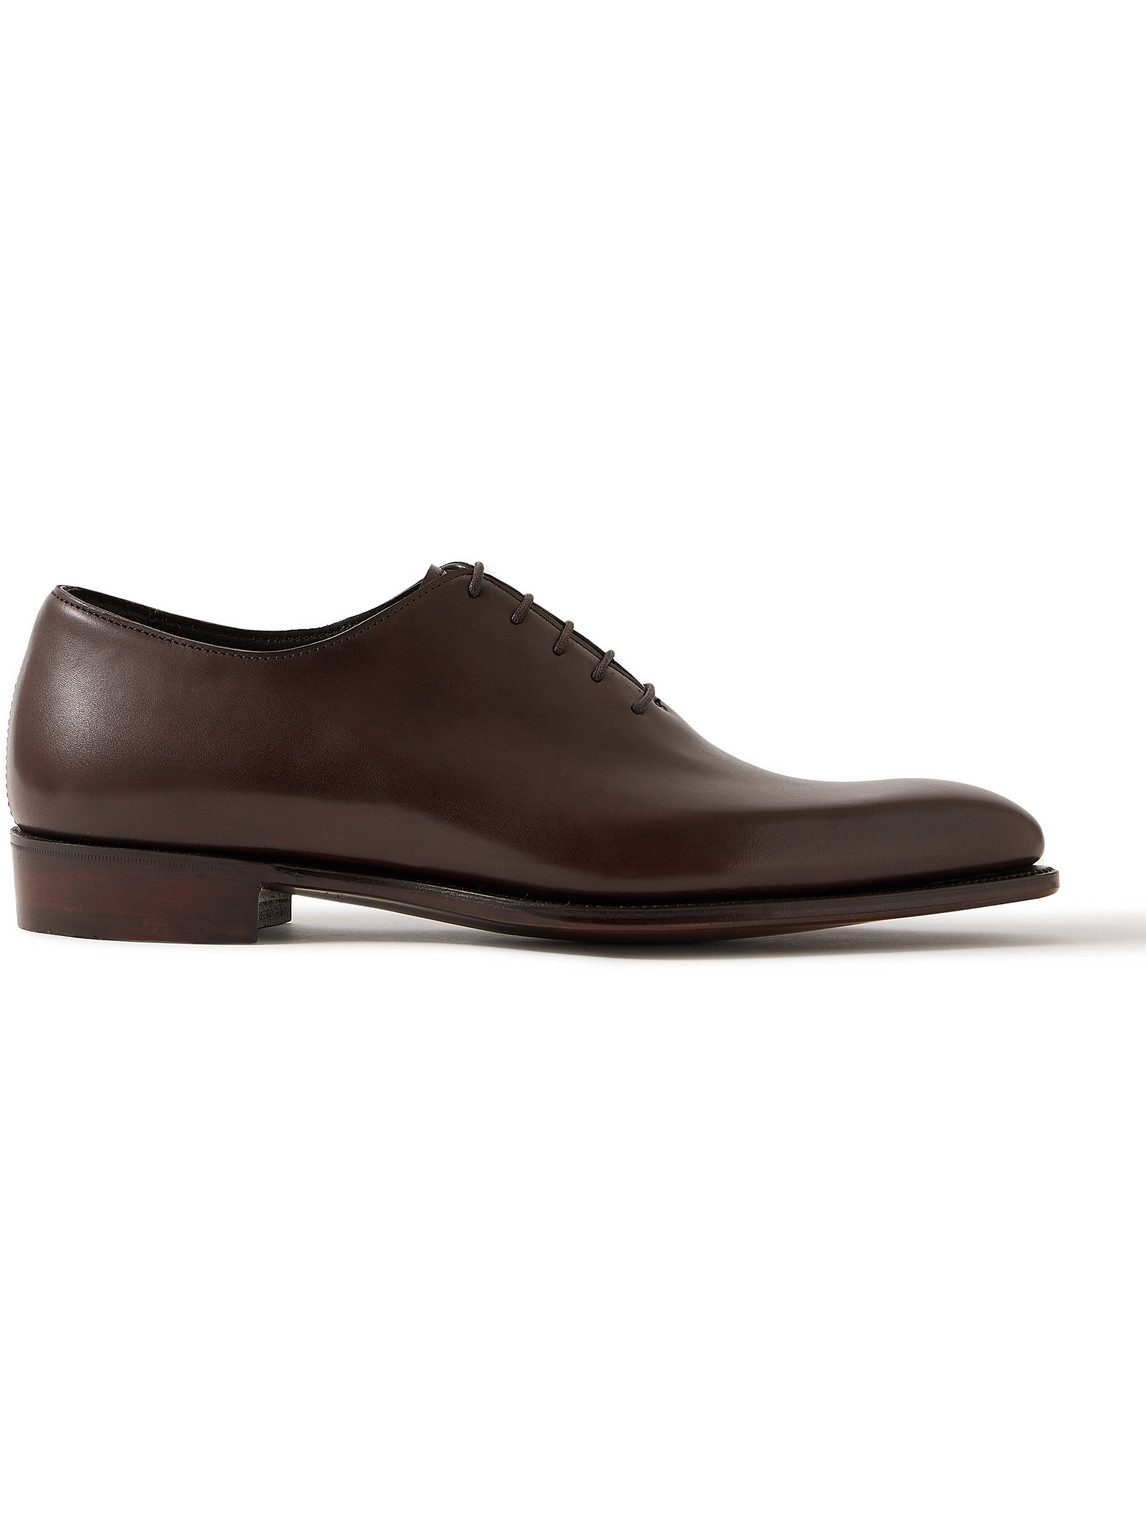 GEORGE CLEVERLEY MERLIN LEATHER OXFORD SHOES